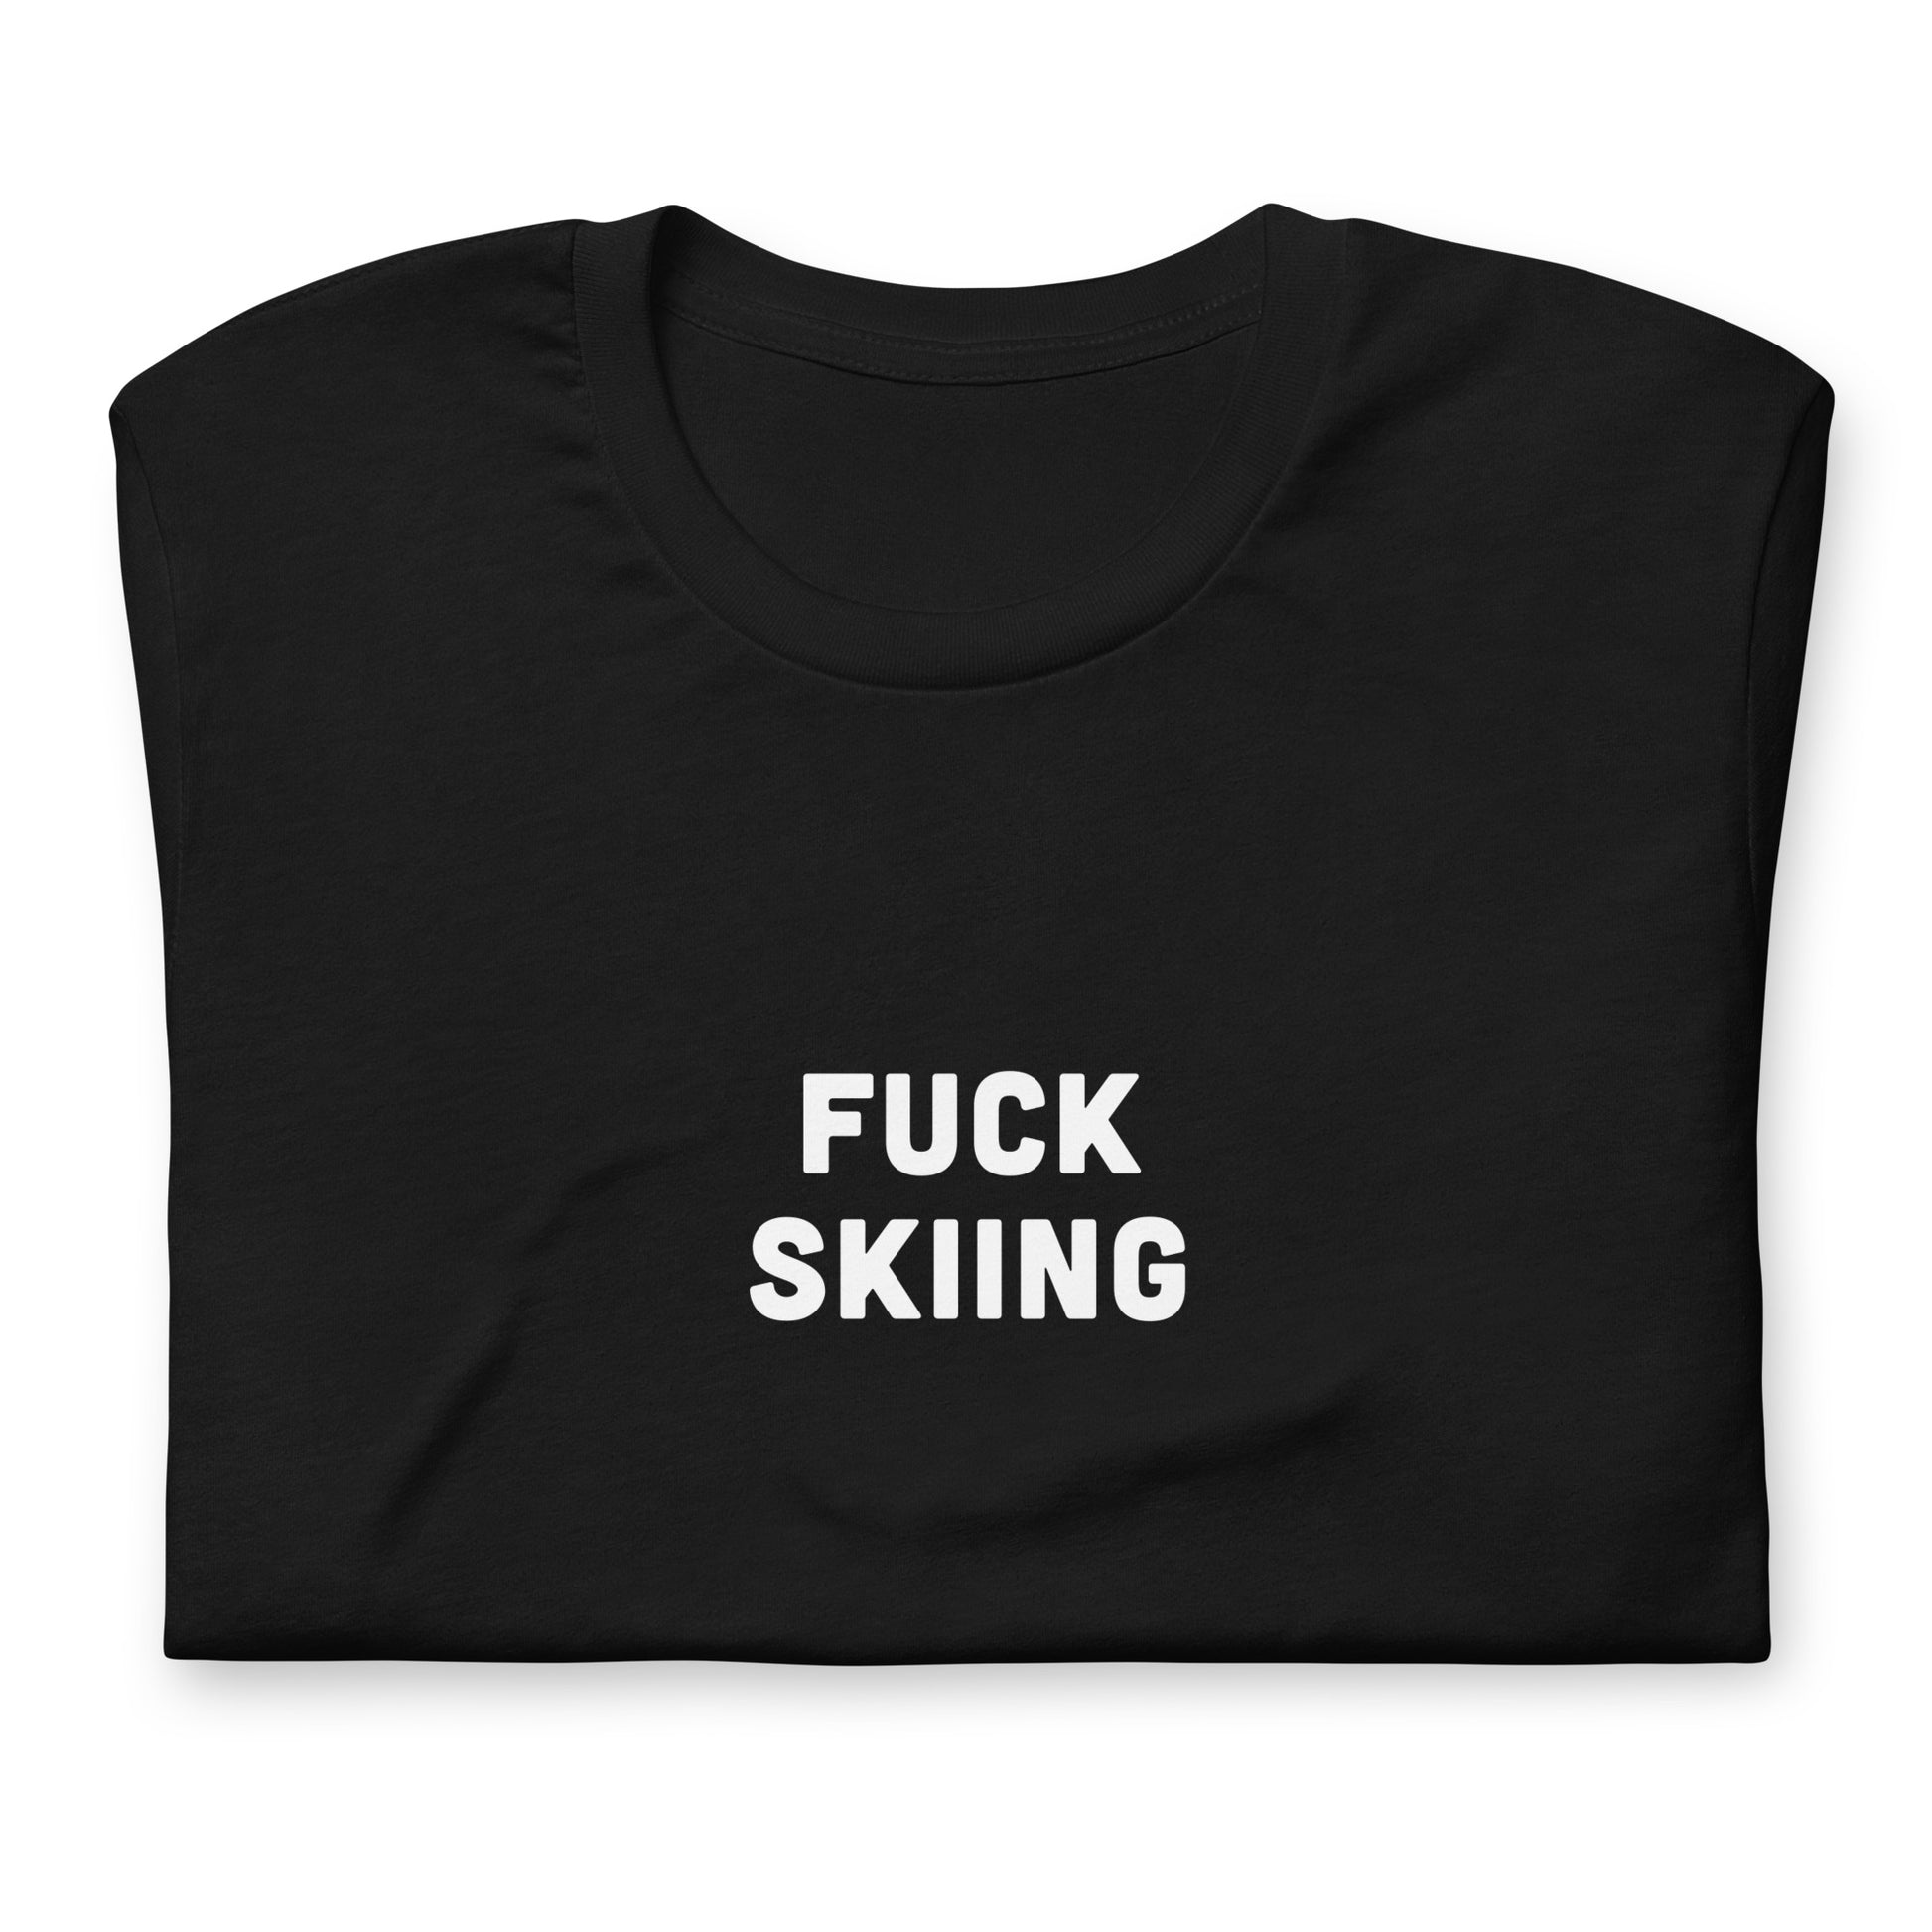 Fuck Skiing T-Shirt Size M Color Black